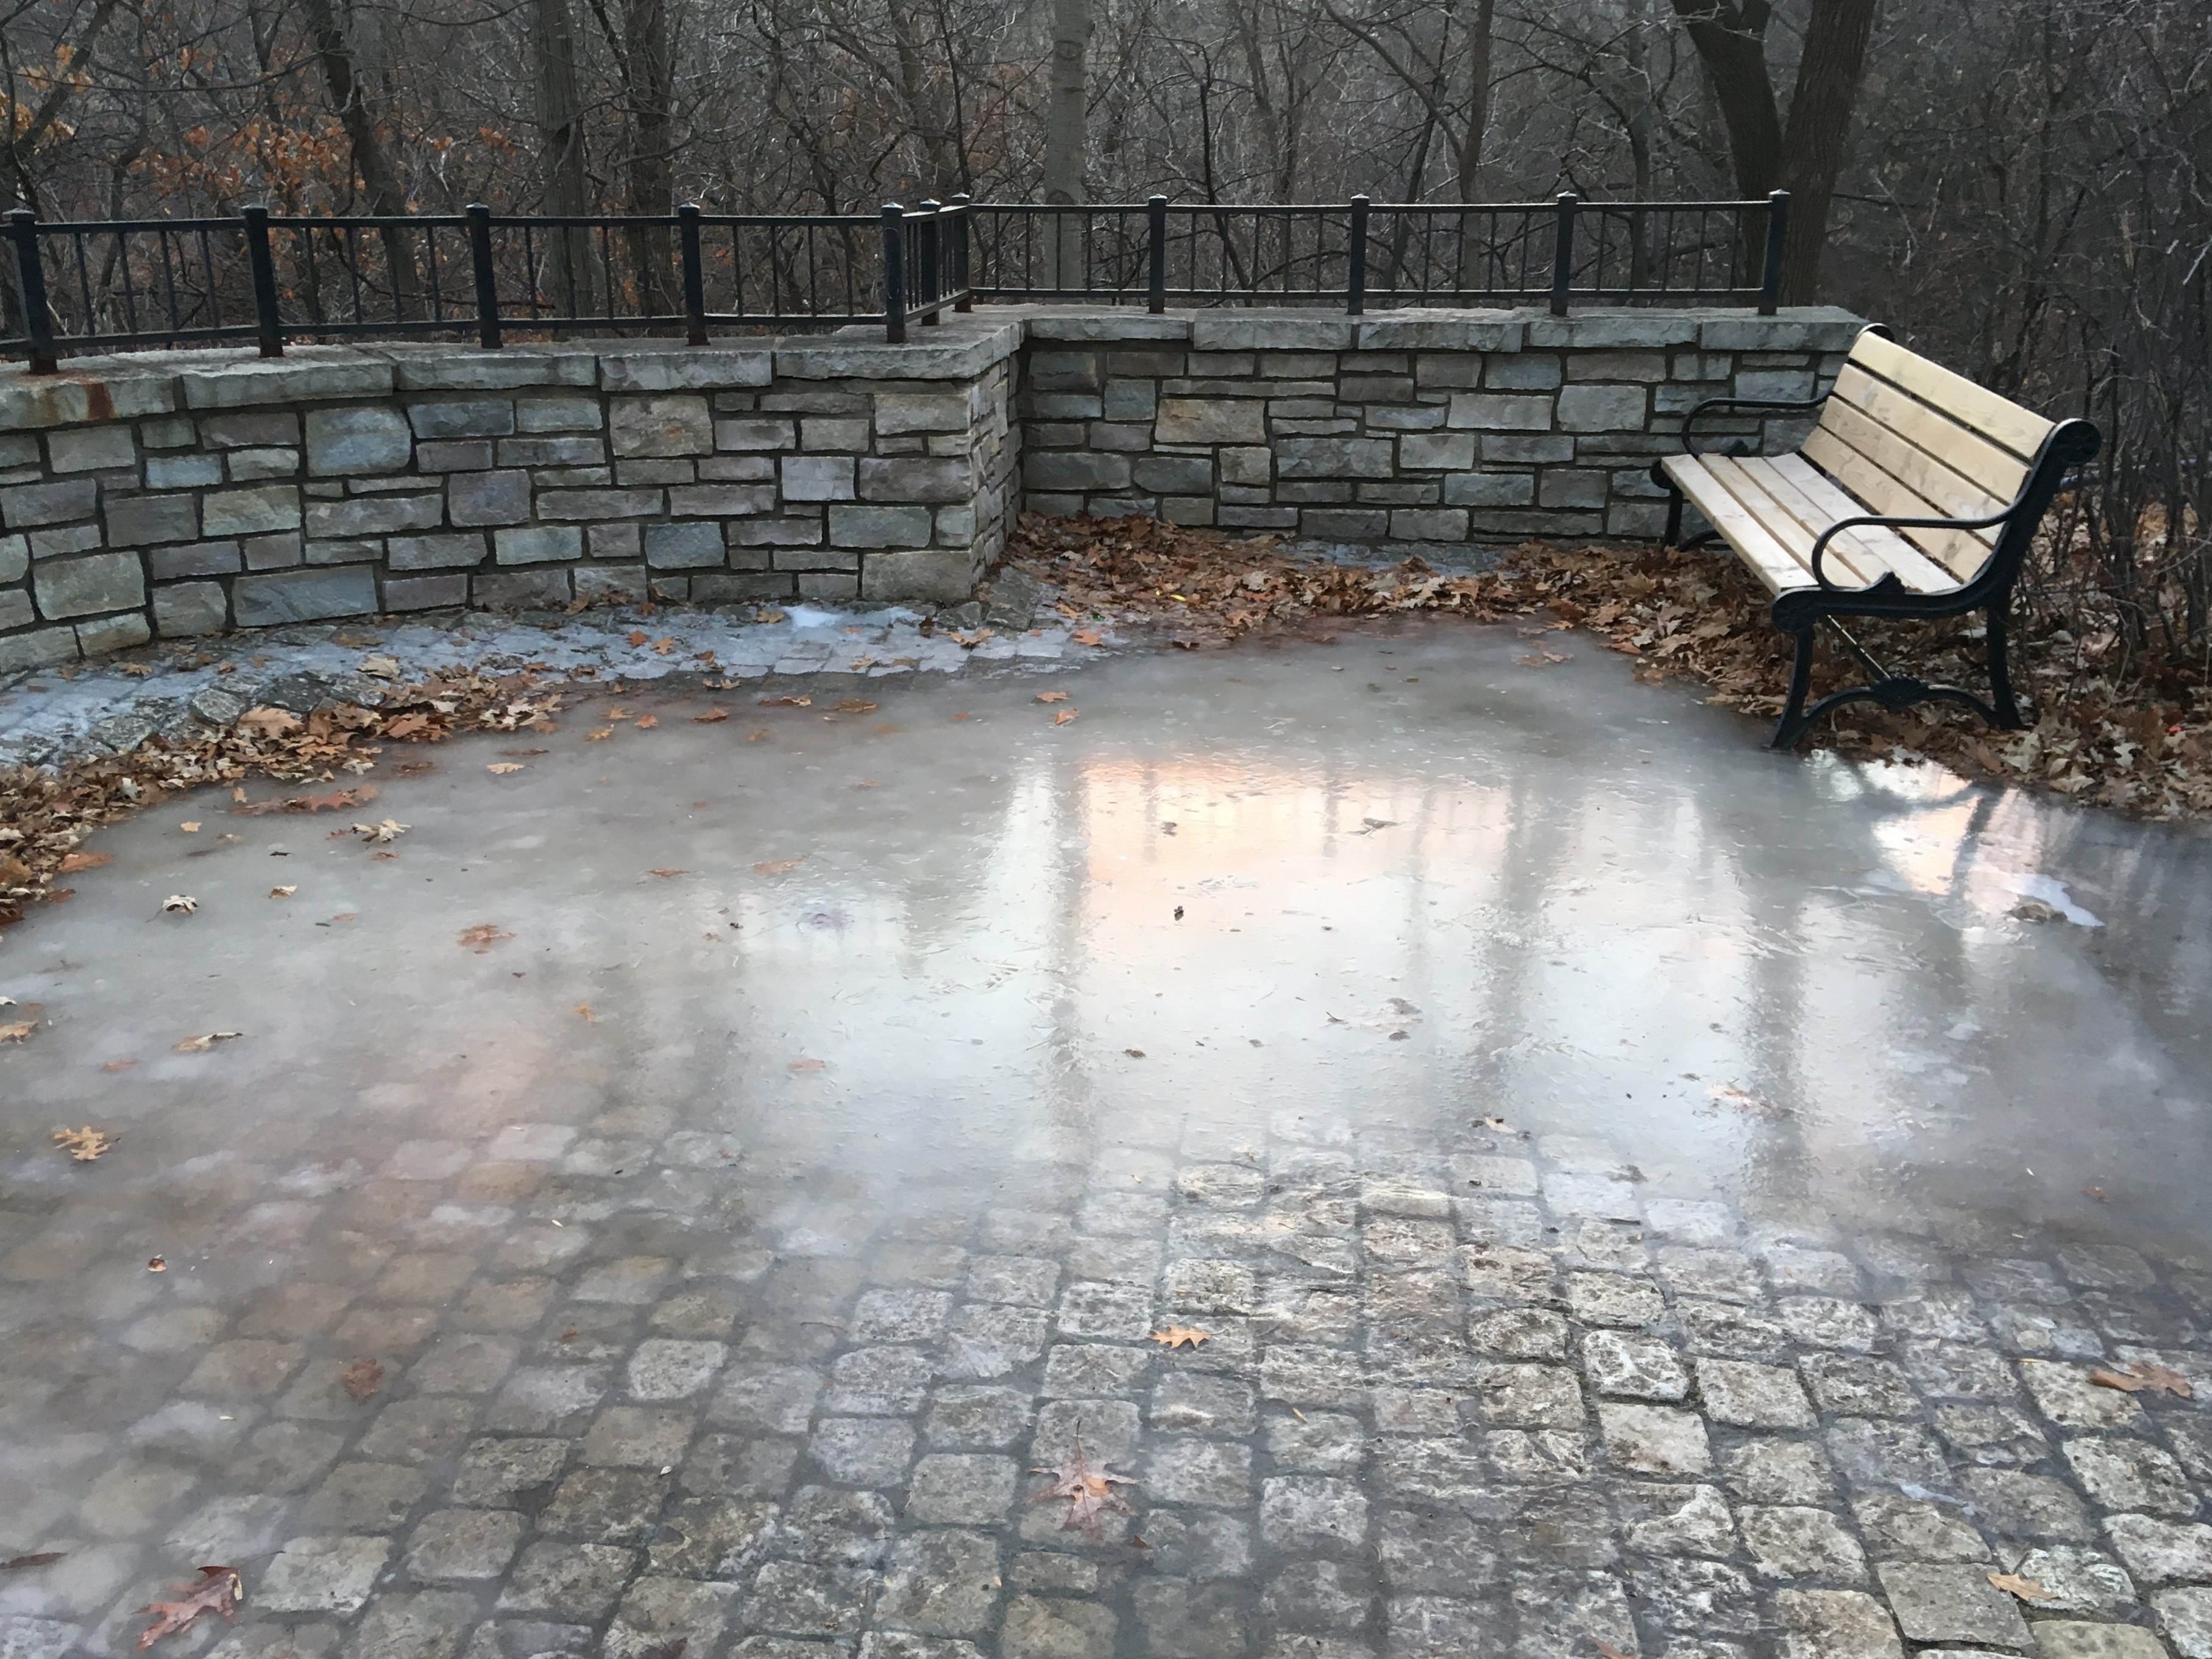 stonework and bench with large iced puddle reflecting a gray sky